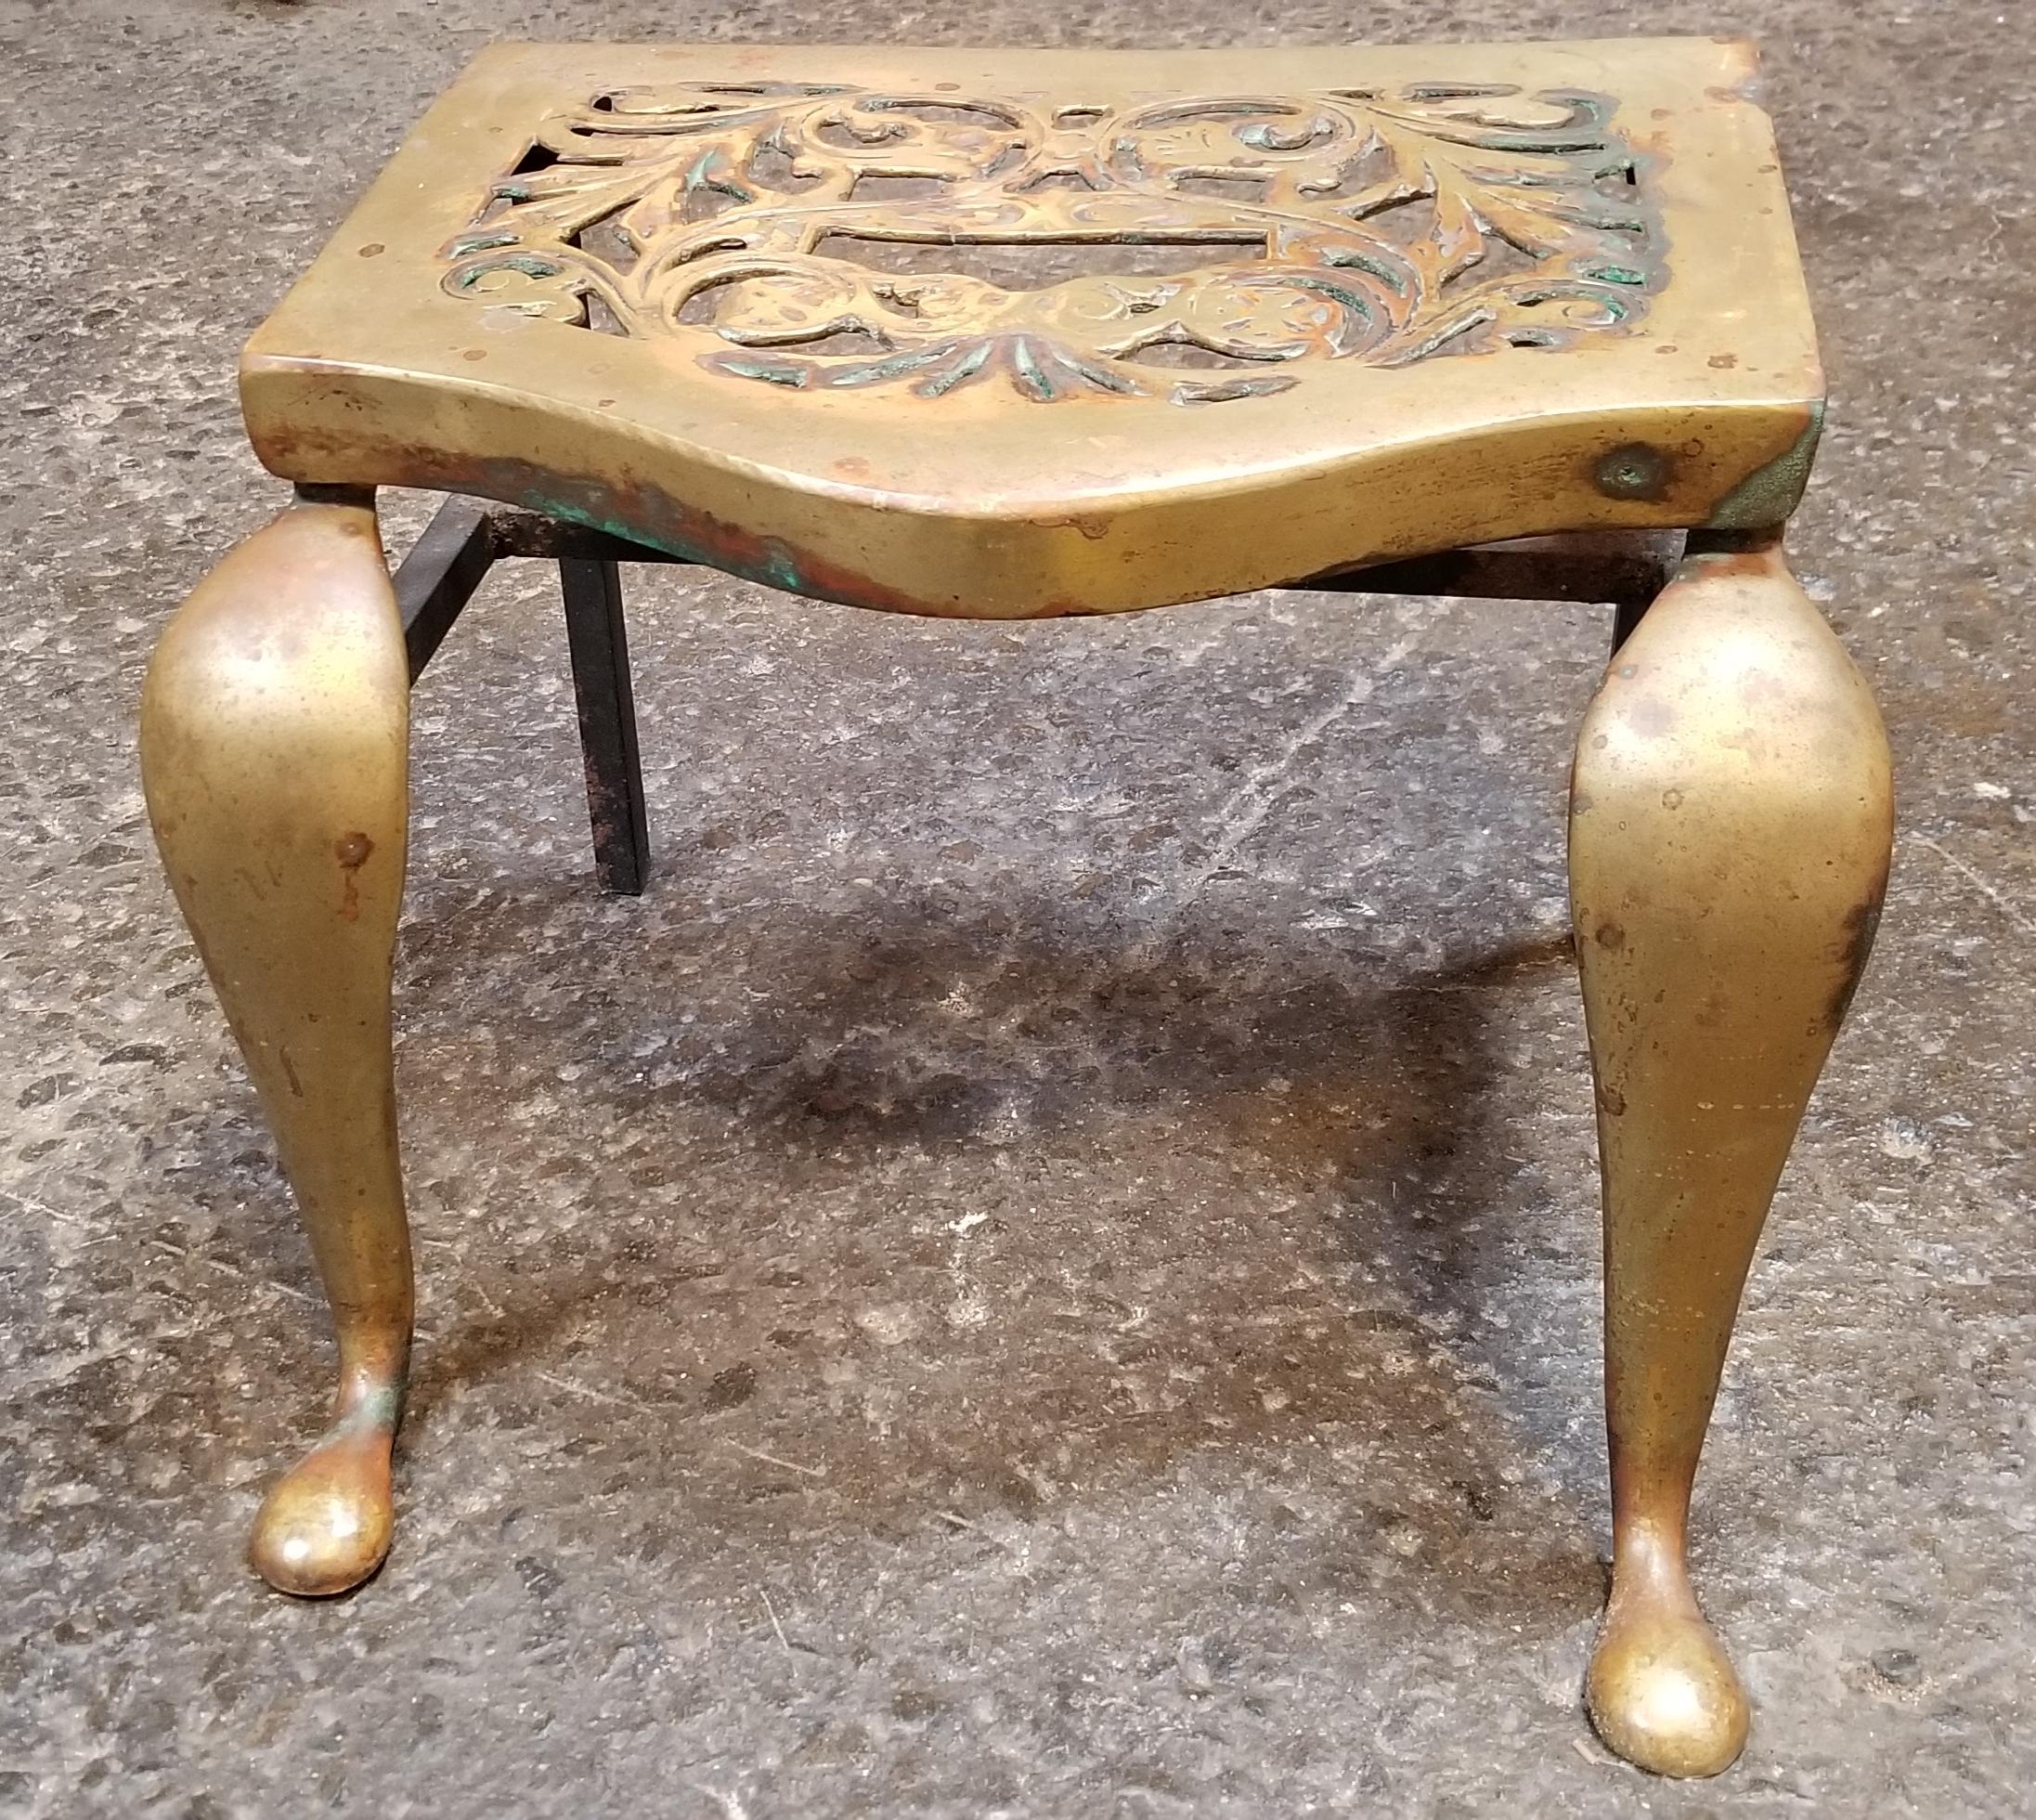 A 19th century brass footman stool with a leaf pattern design. Made of solid cast brass attached to iron base. Could also be used as a side or end table or plant stand.